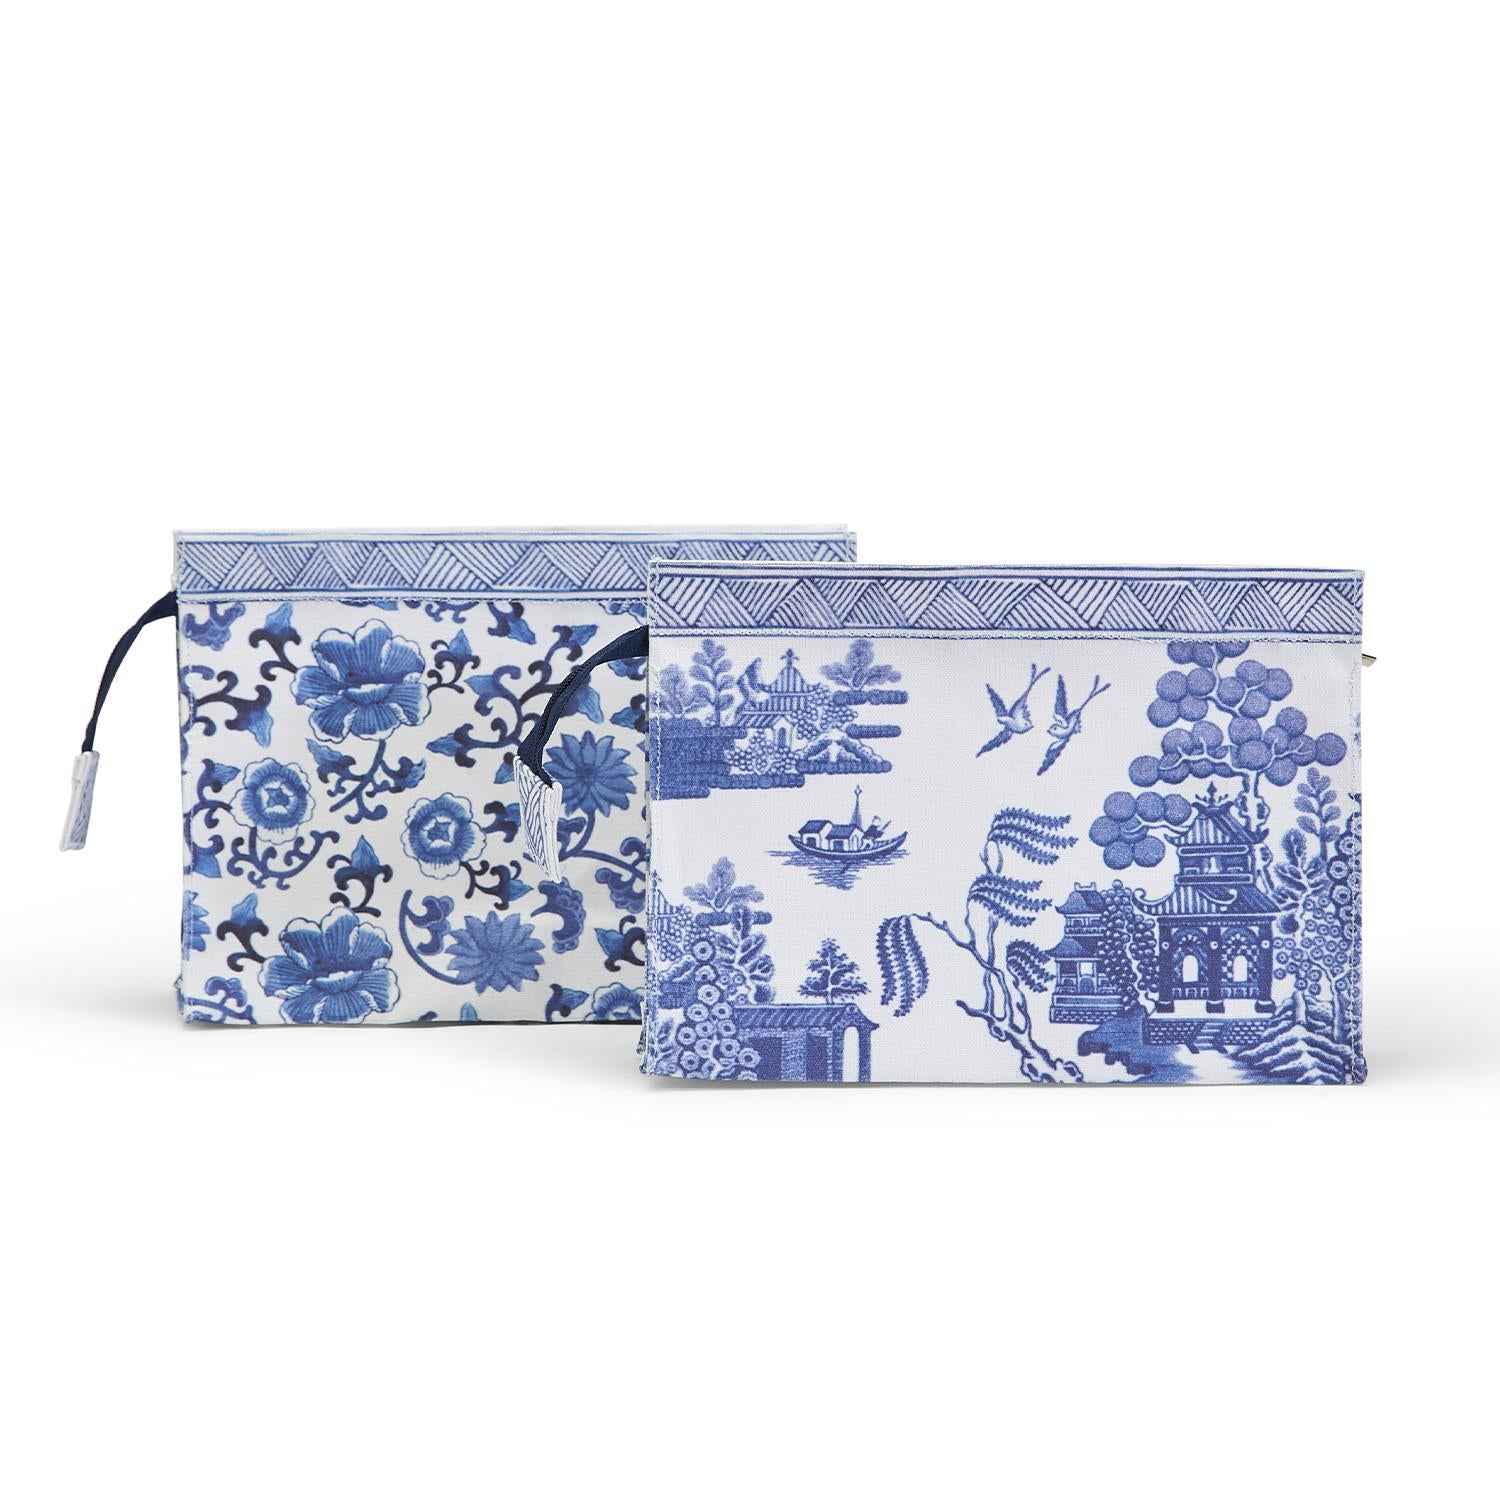 Two’s Company - Chinoiserie Multipurpose Pouch Assorted 2 Designs: Blue Floral and Blue Willow - Cotton Canvas